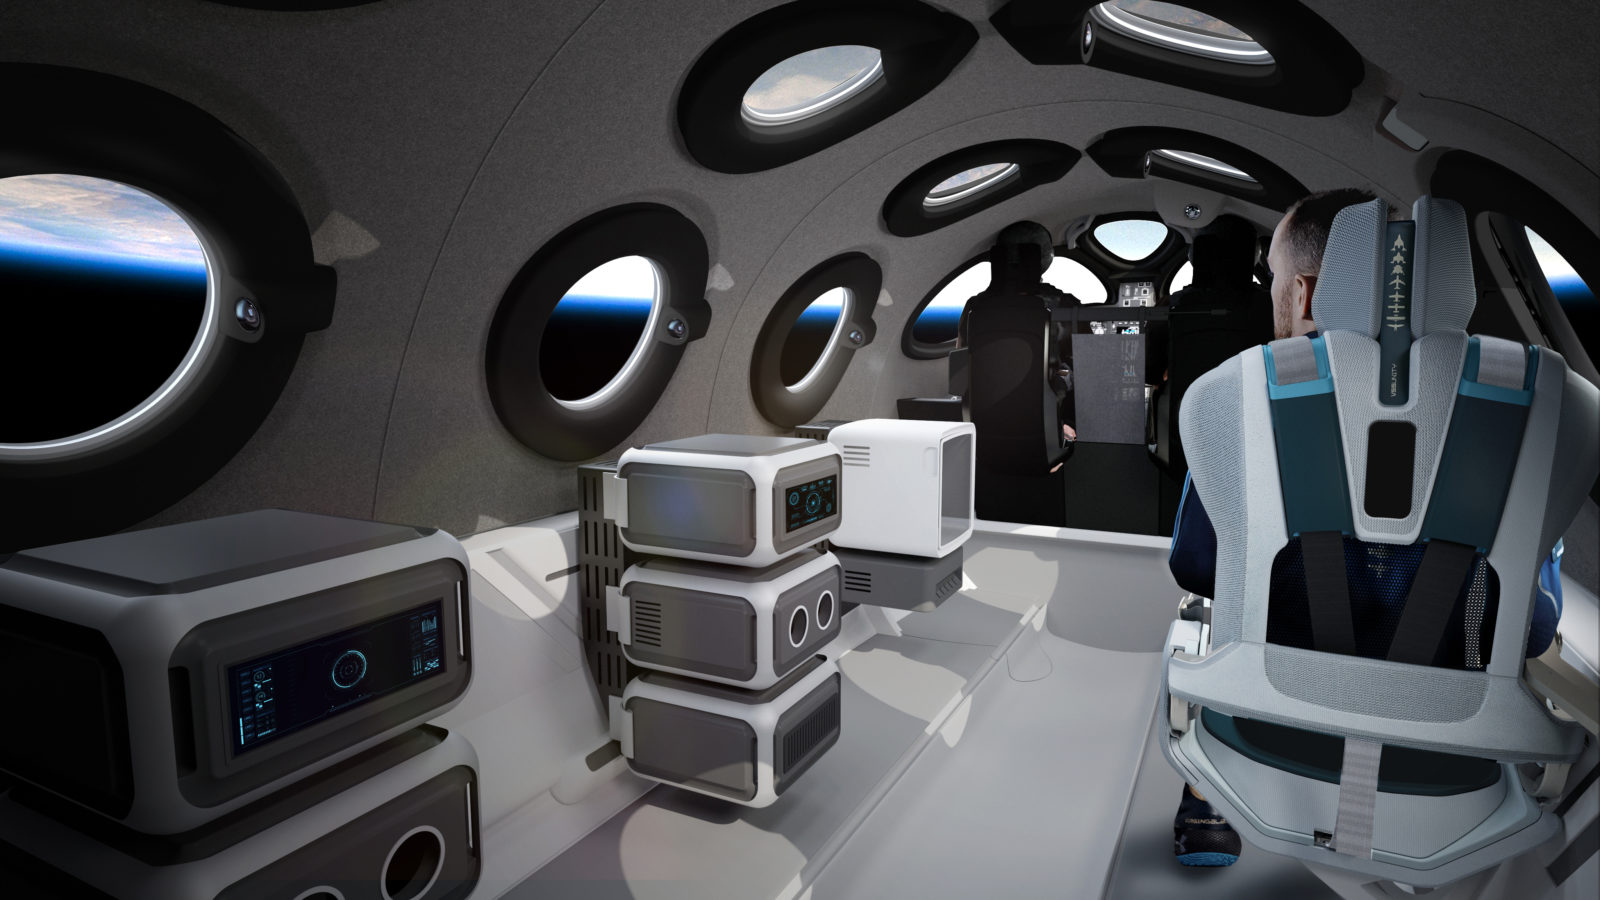 Virgin Galactic Spaceship Cabin In Payload Configuration 1 1600x900